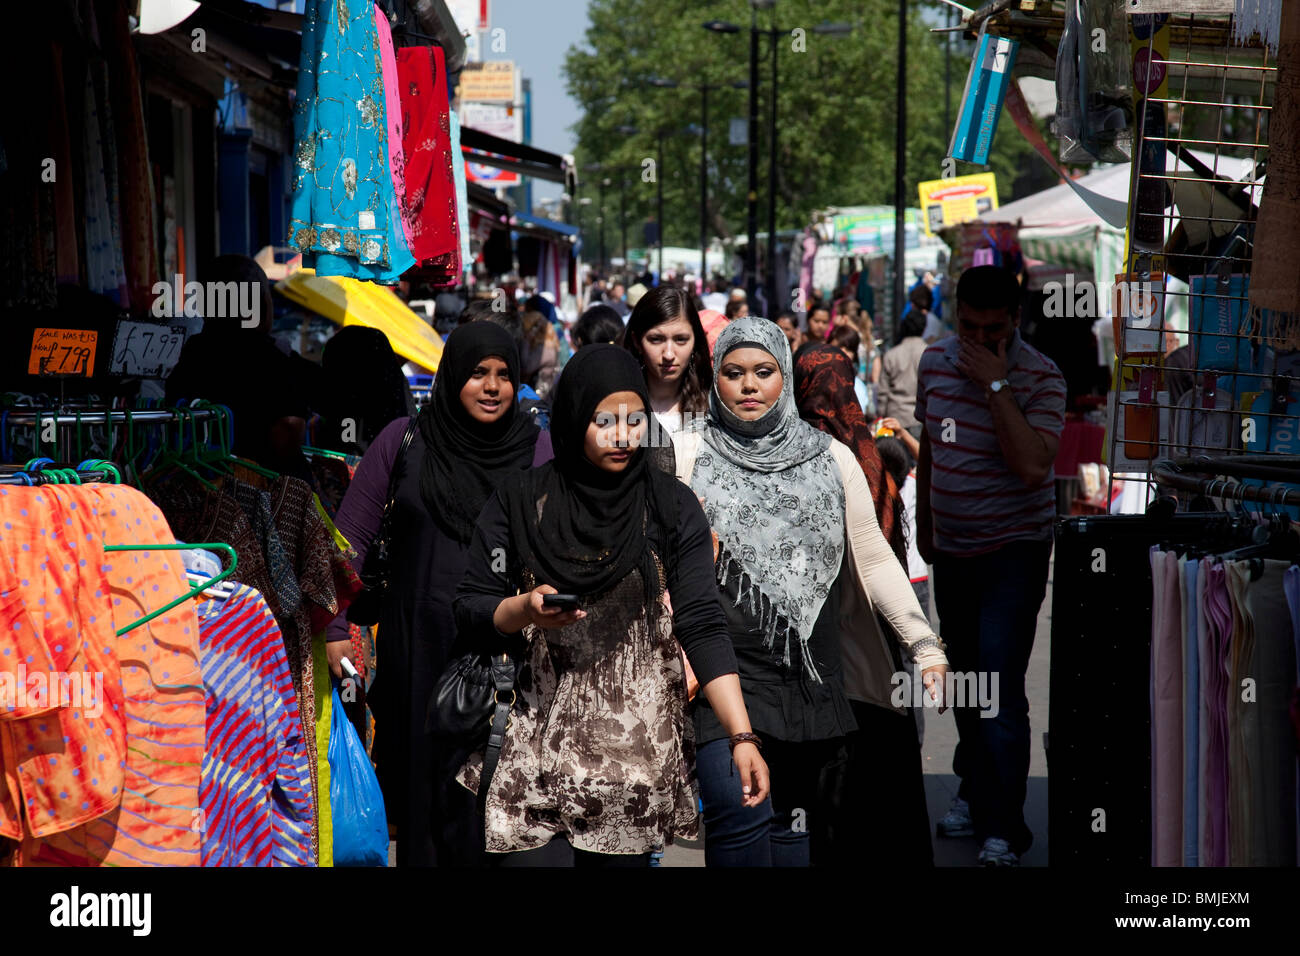 People from various ethnic backgrounds (mainly Muslim) around the market on Whitechapel High Street in East London. Stock Photo